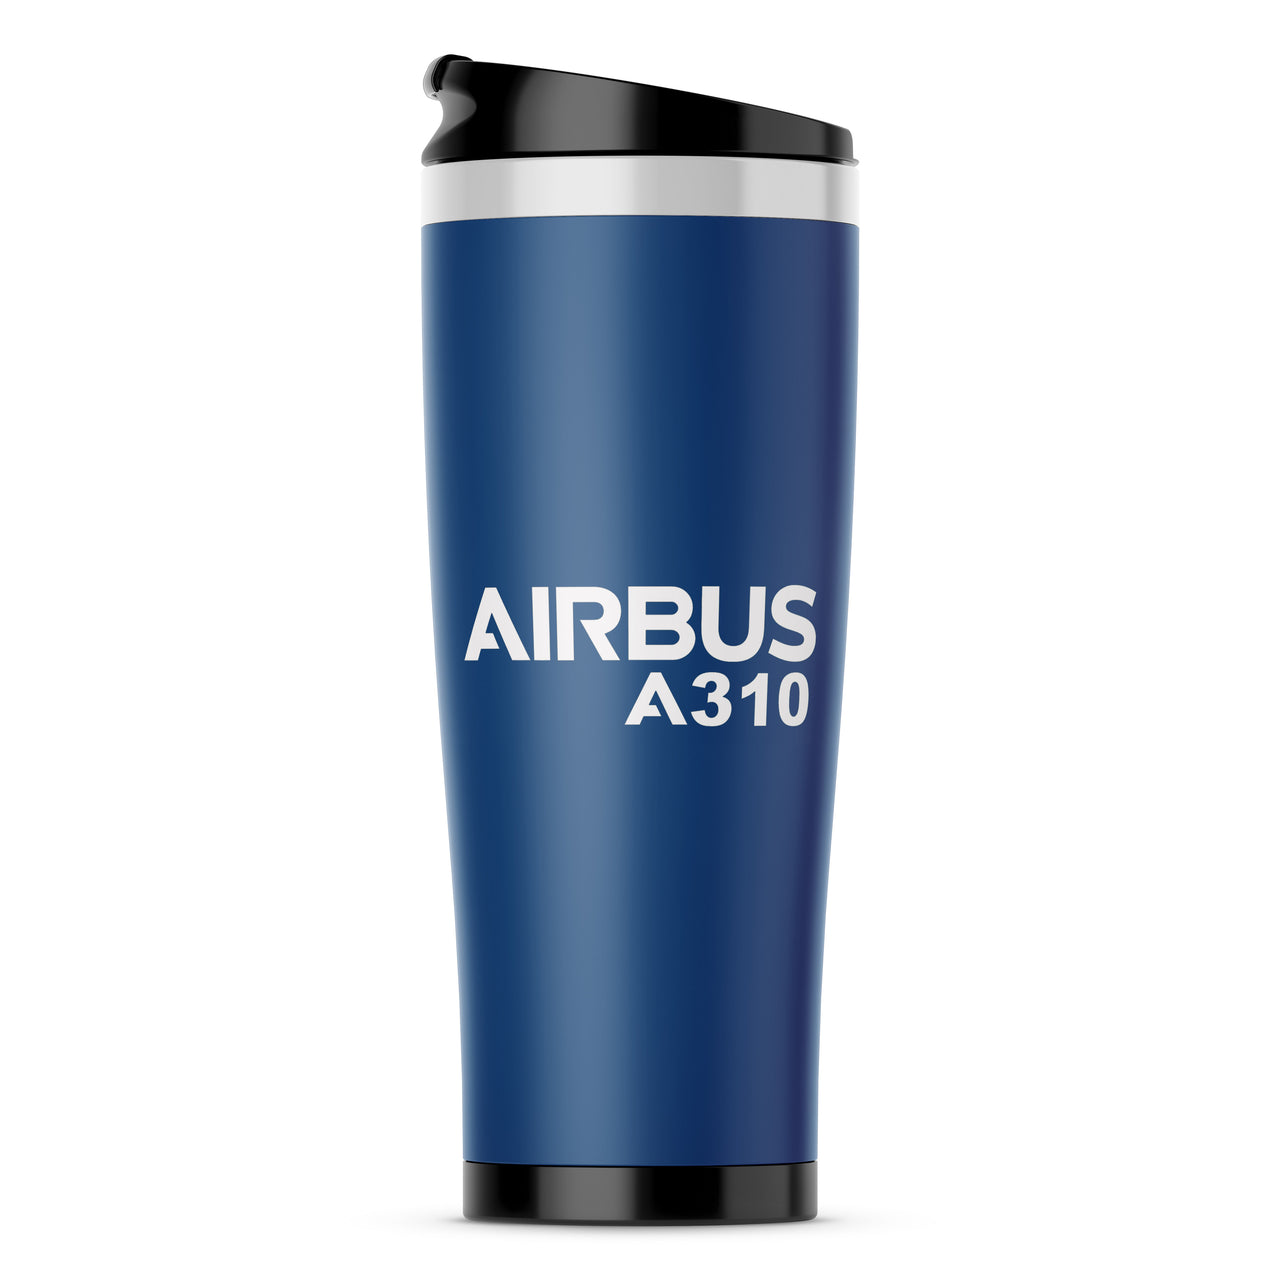 Airbus A310 & Text Designed Travel Mugs